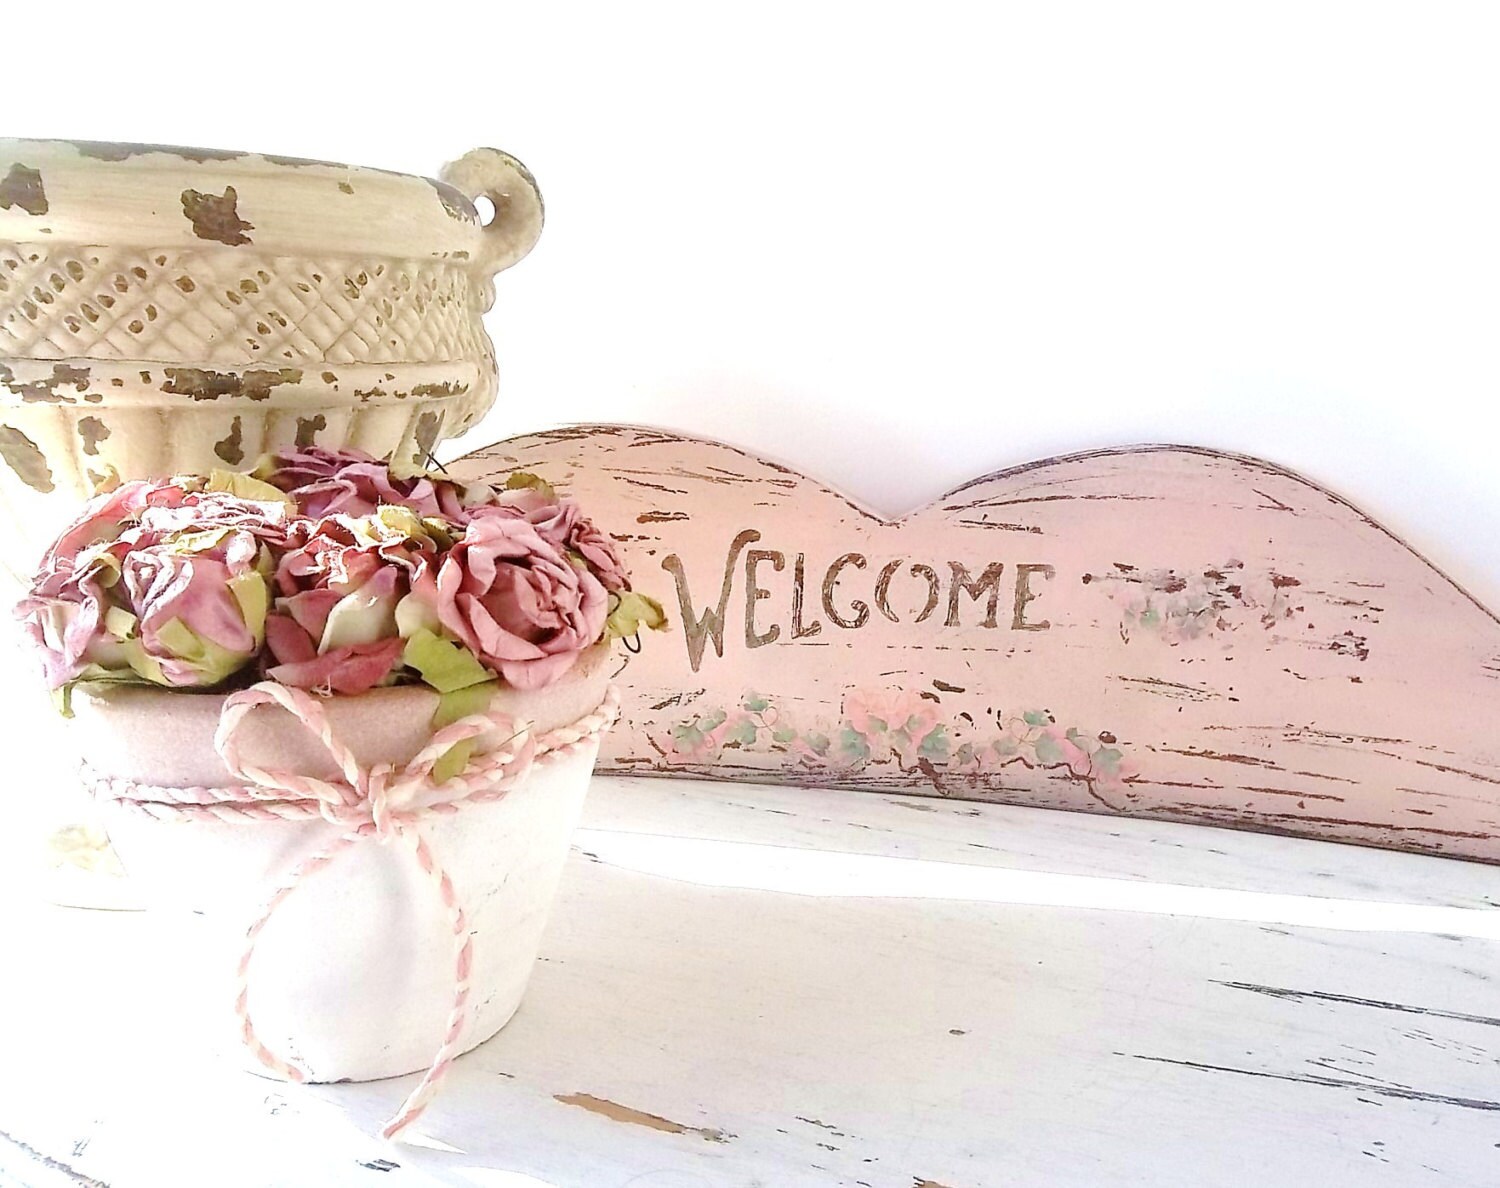 Chic. 3vintagehearts chic Garden by Rustic signs  Sign. Welcome rustic Pink Shabby